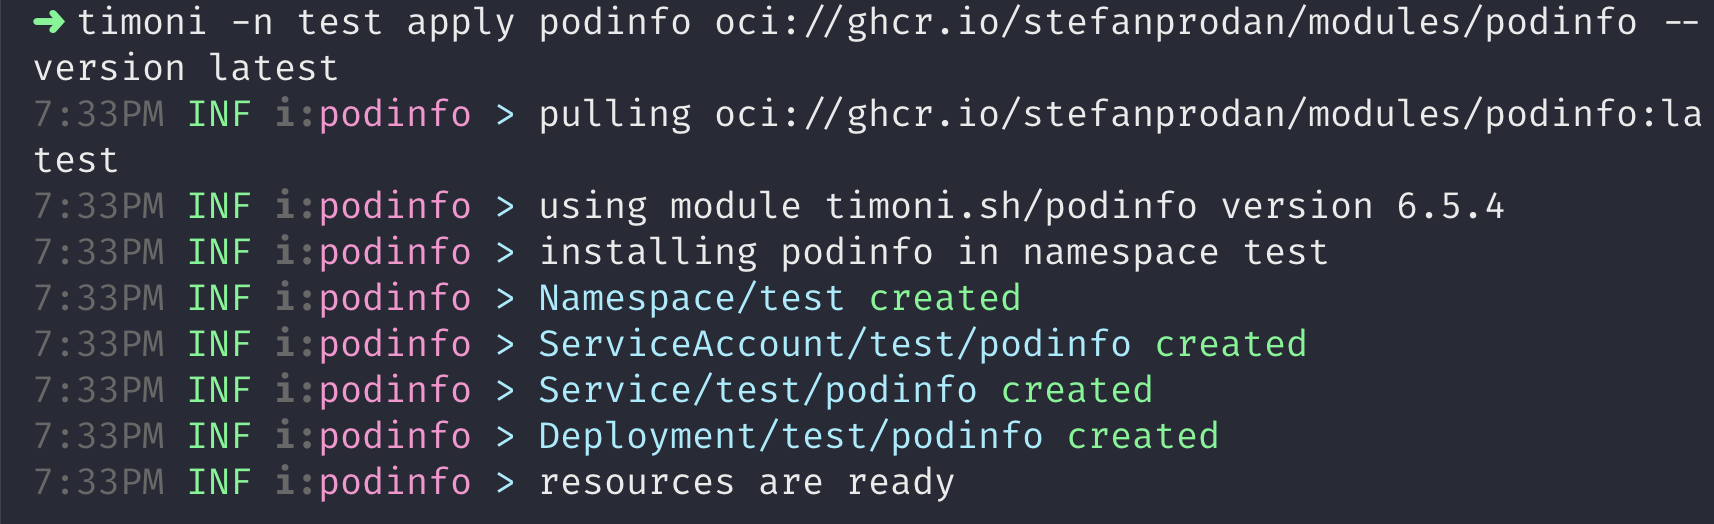 A screenshot of a terminal showing Timoni's output of a deployment